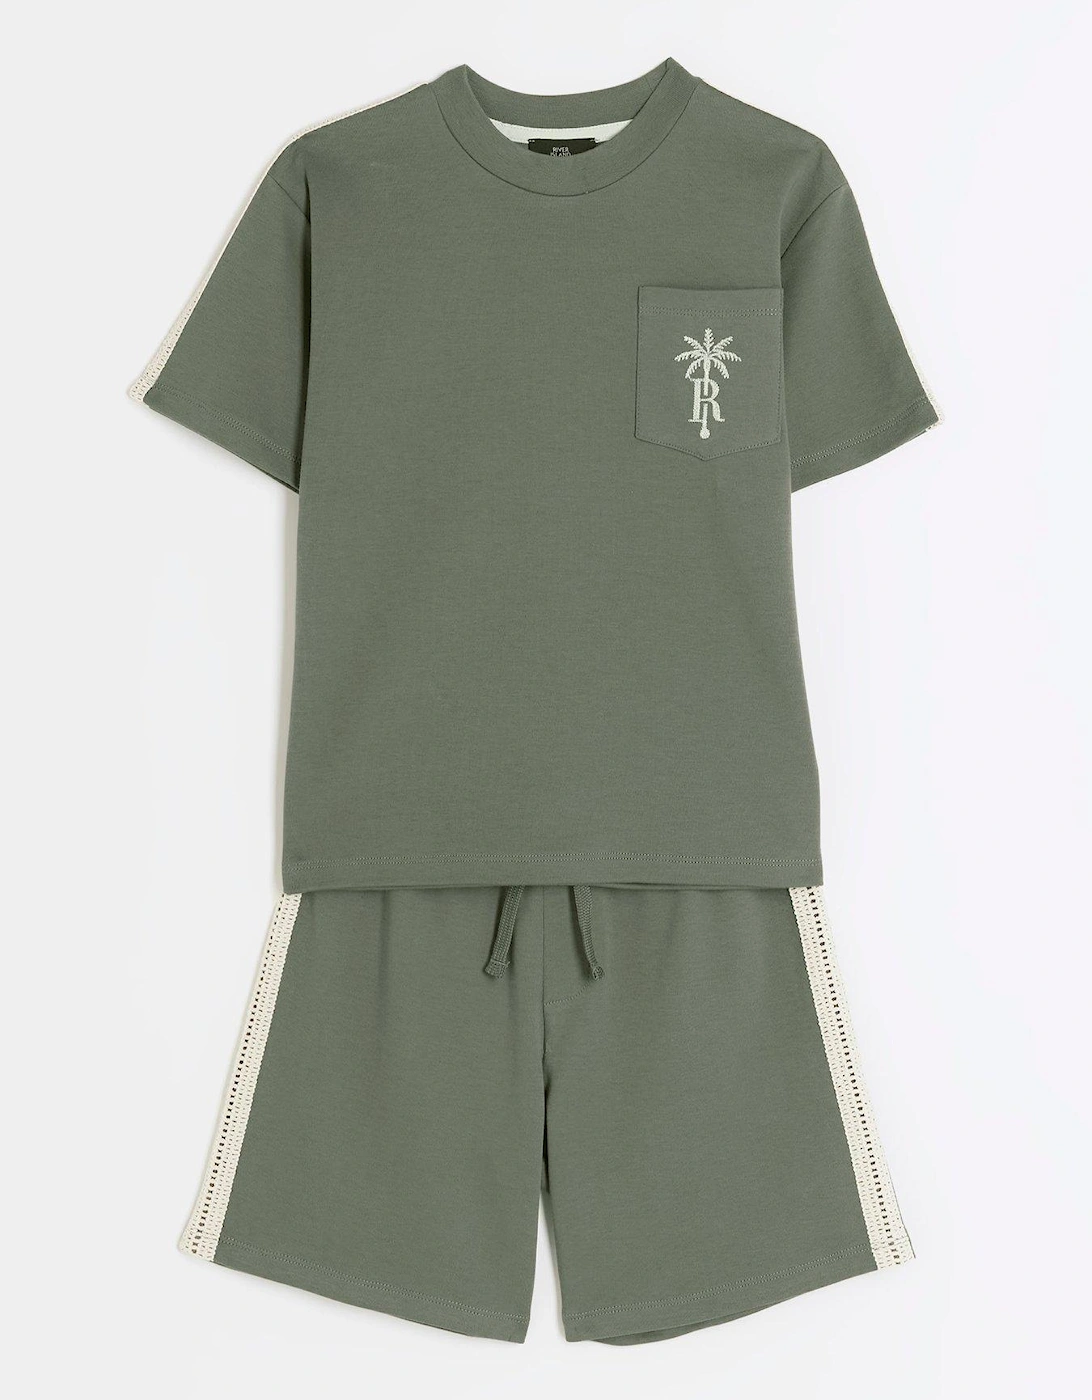 Boys Embroidered T-shirt Set - Green